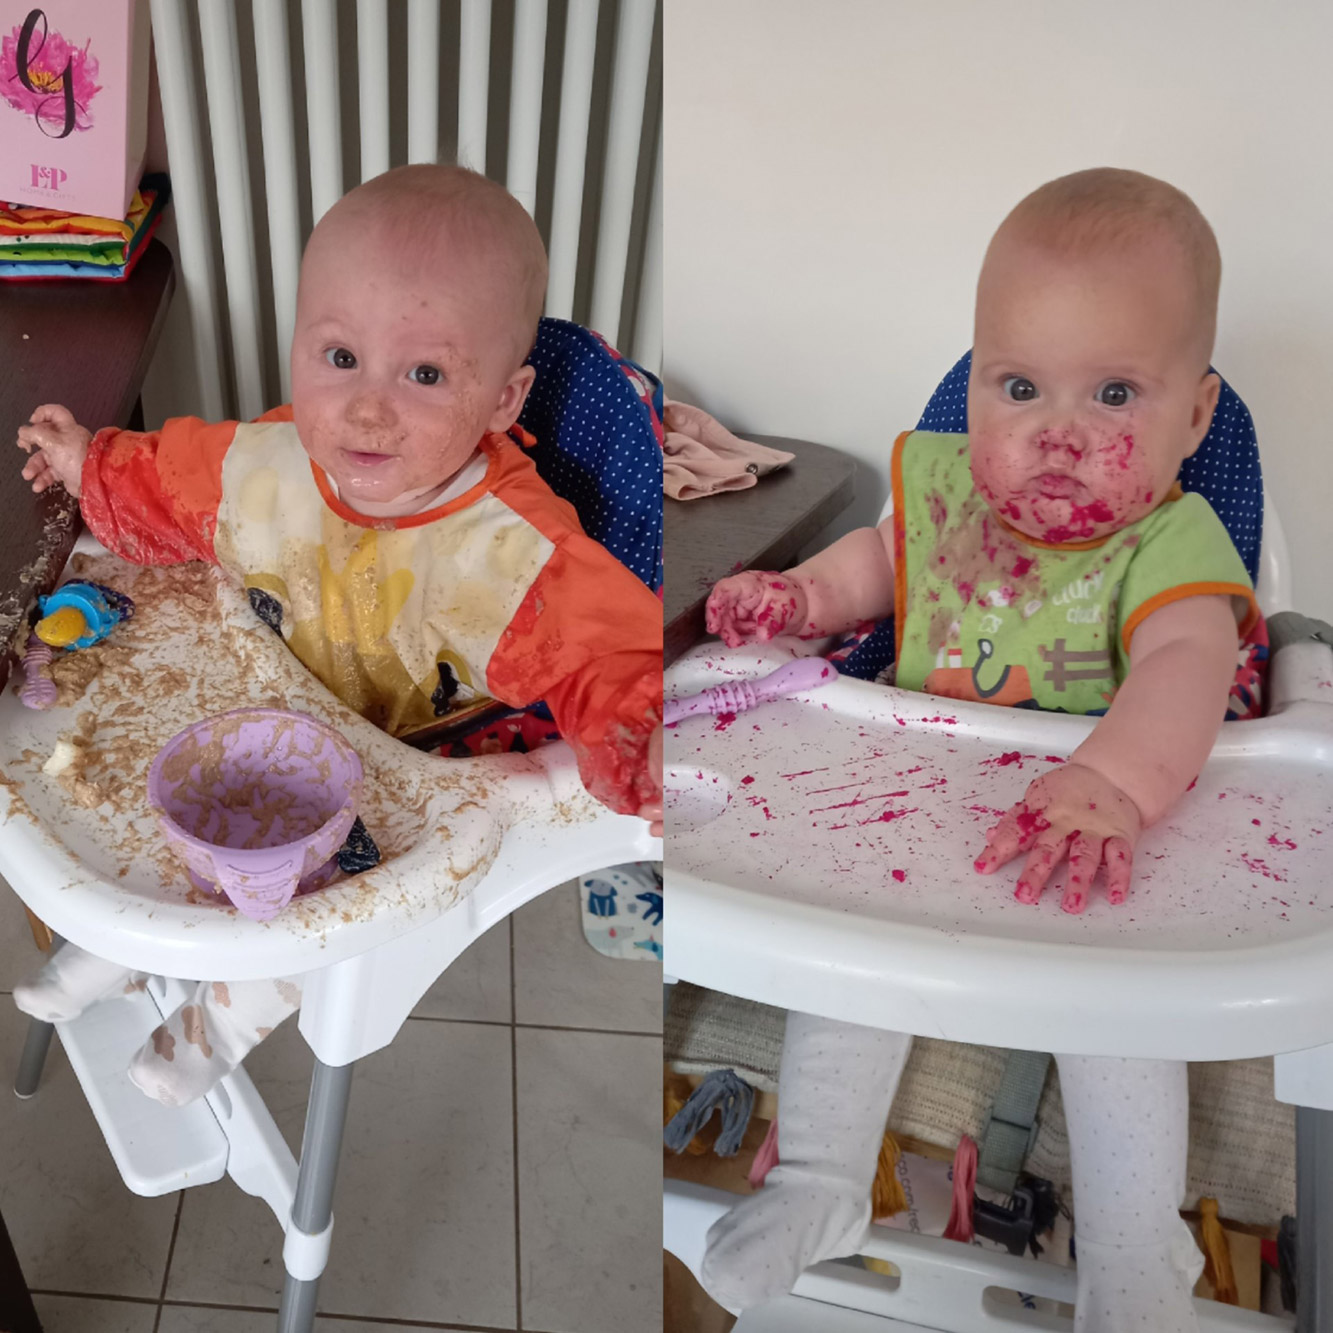 Baby-Led-Weaning-it-will-be-fun-they-said.jpg